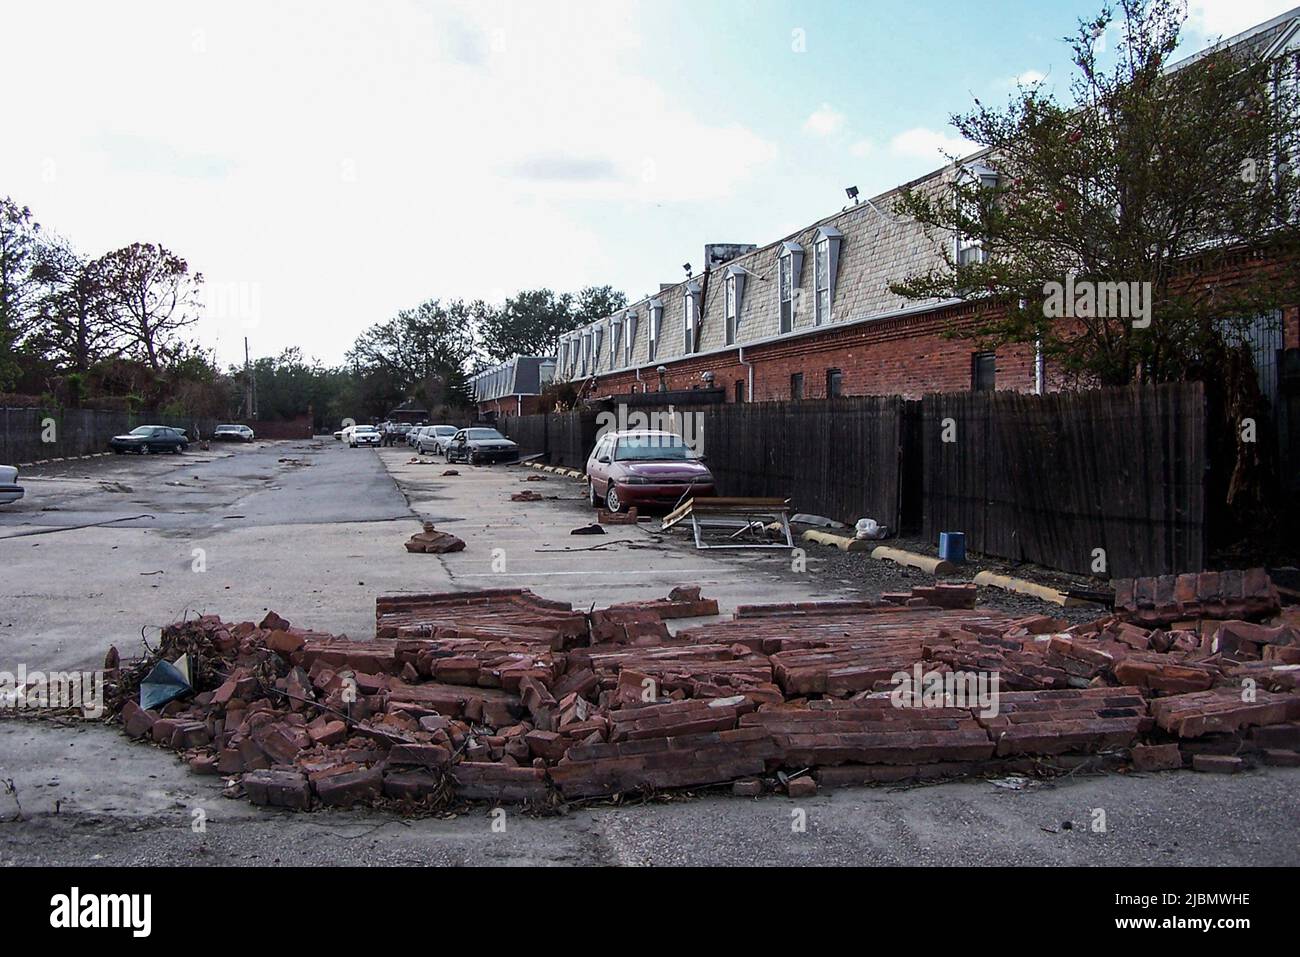 Hurricane Katrina was the costliest in U.S. history and left widespread economic impacts. Oil and gas industry operations were crippled after the stor Stock Photo